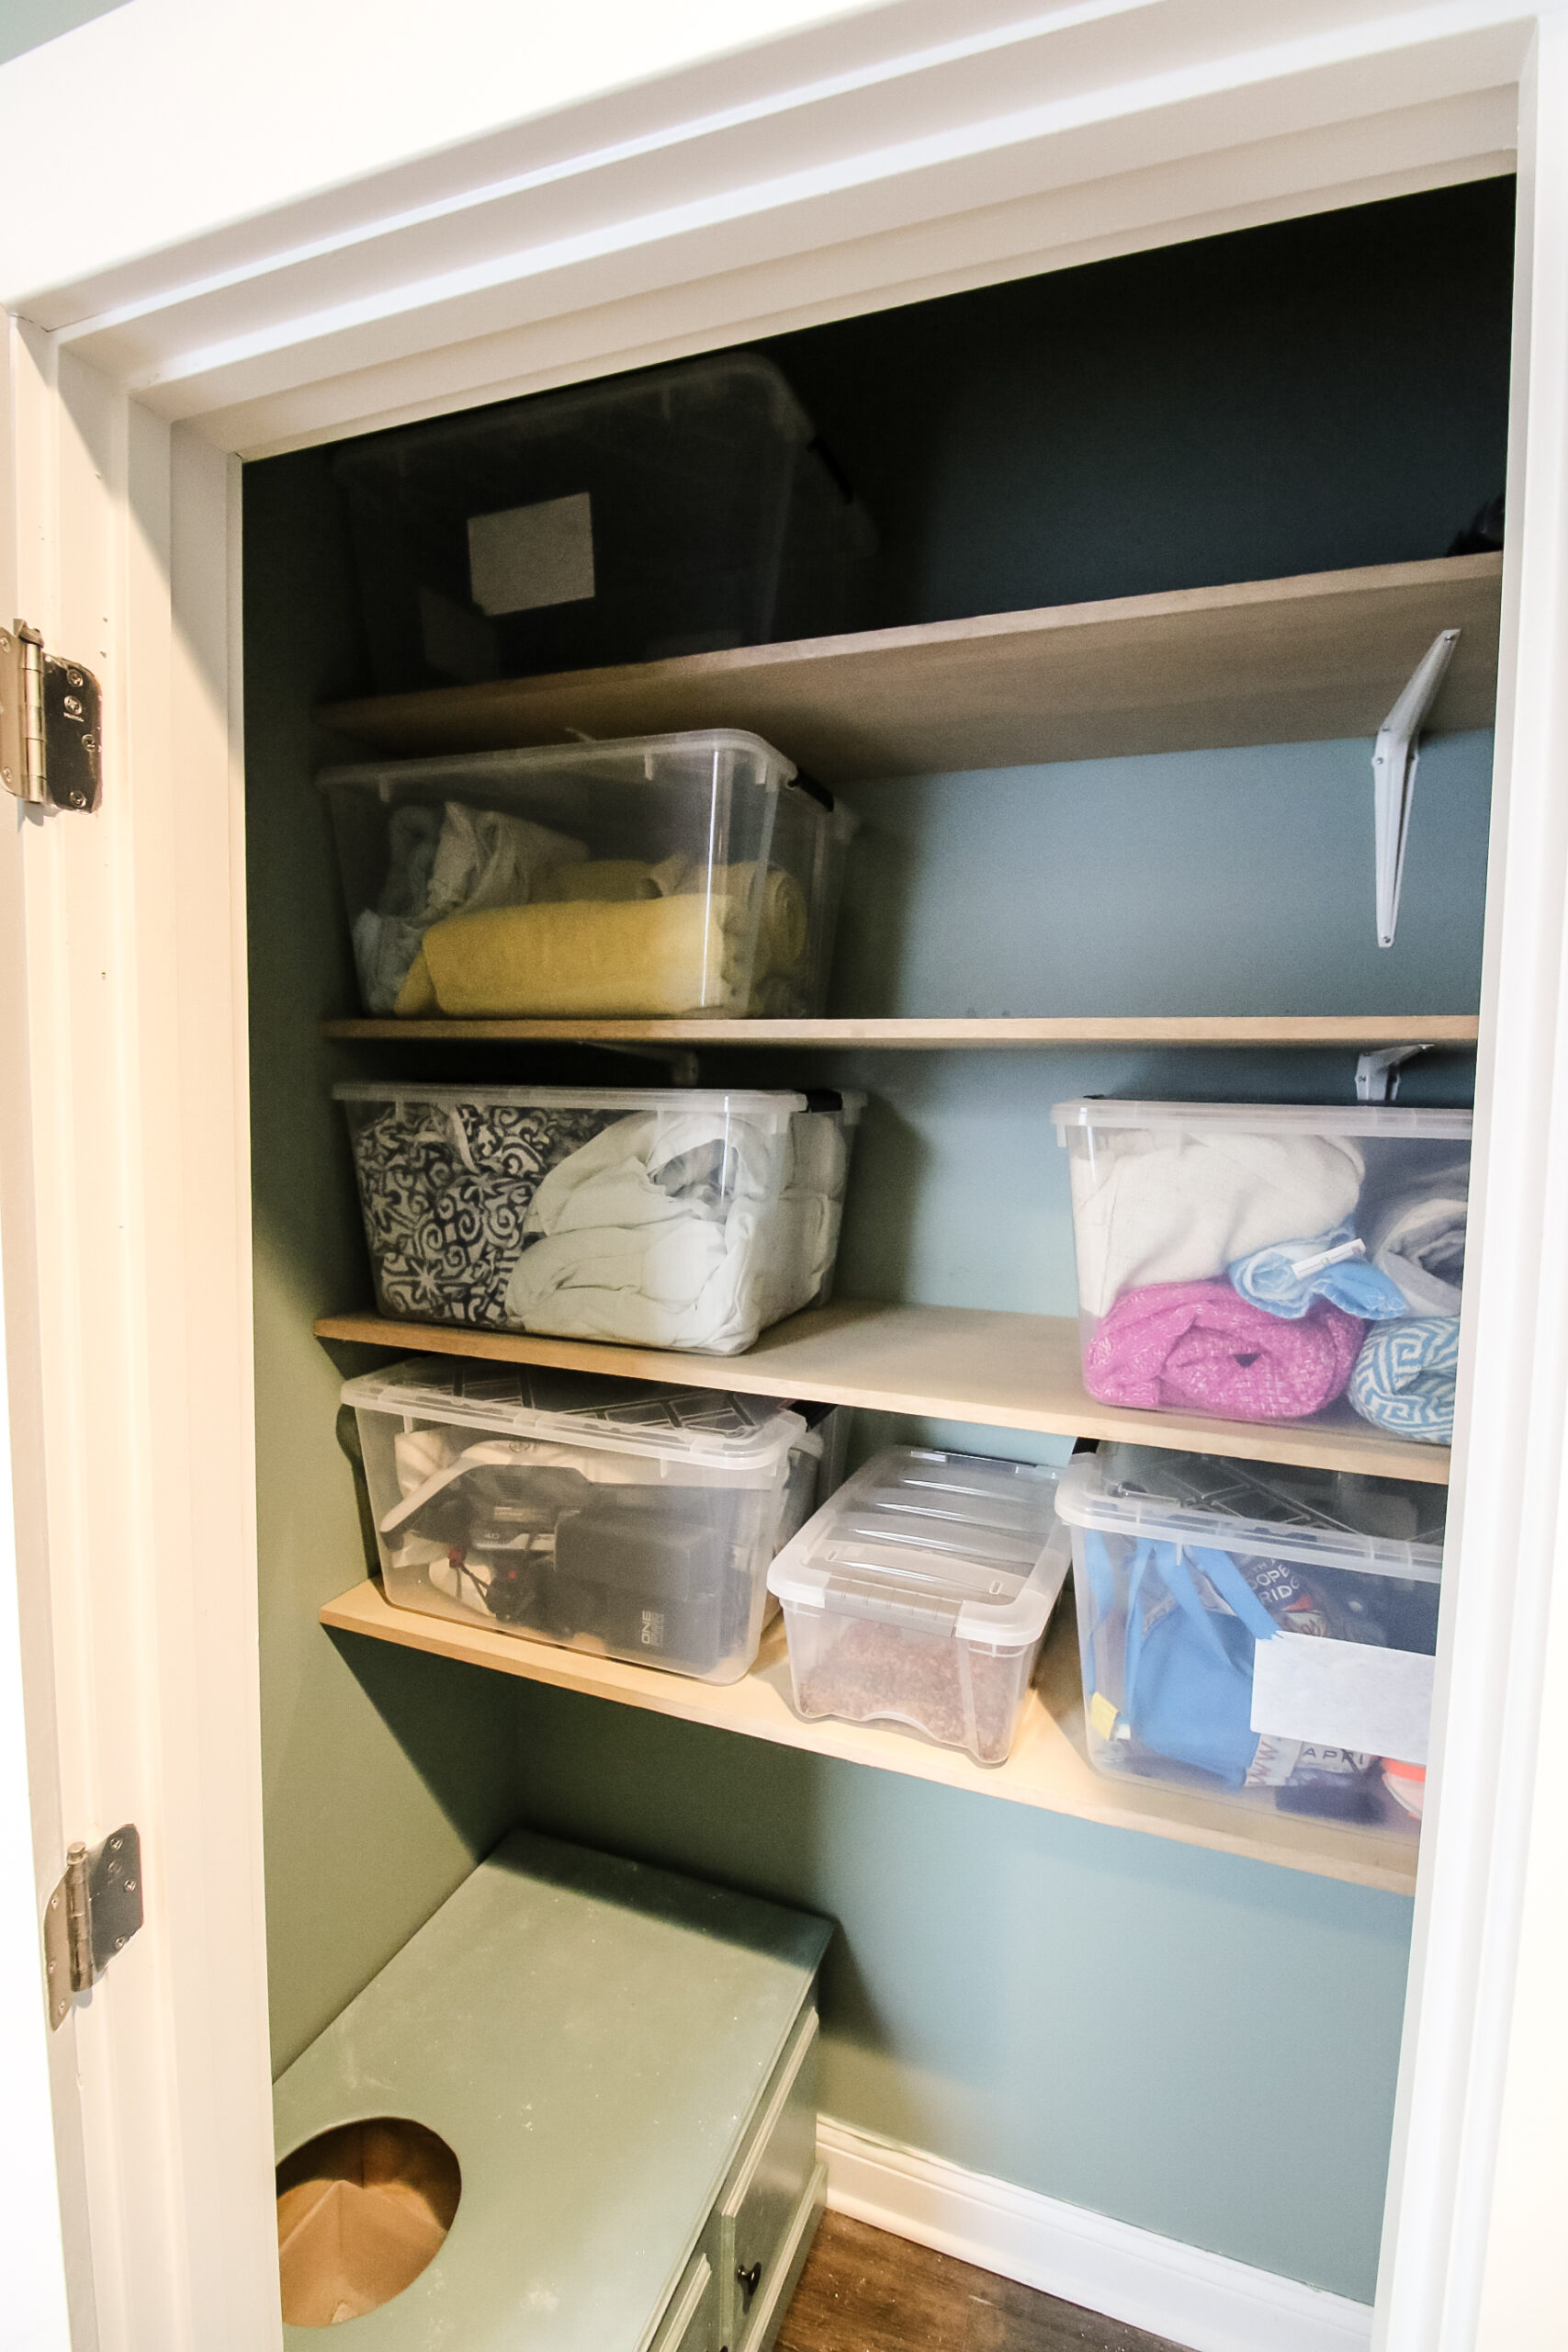 How to Turn a Closet Into Built In Shelves